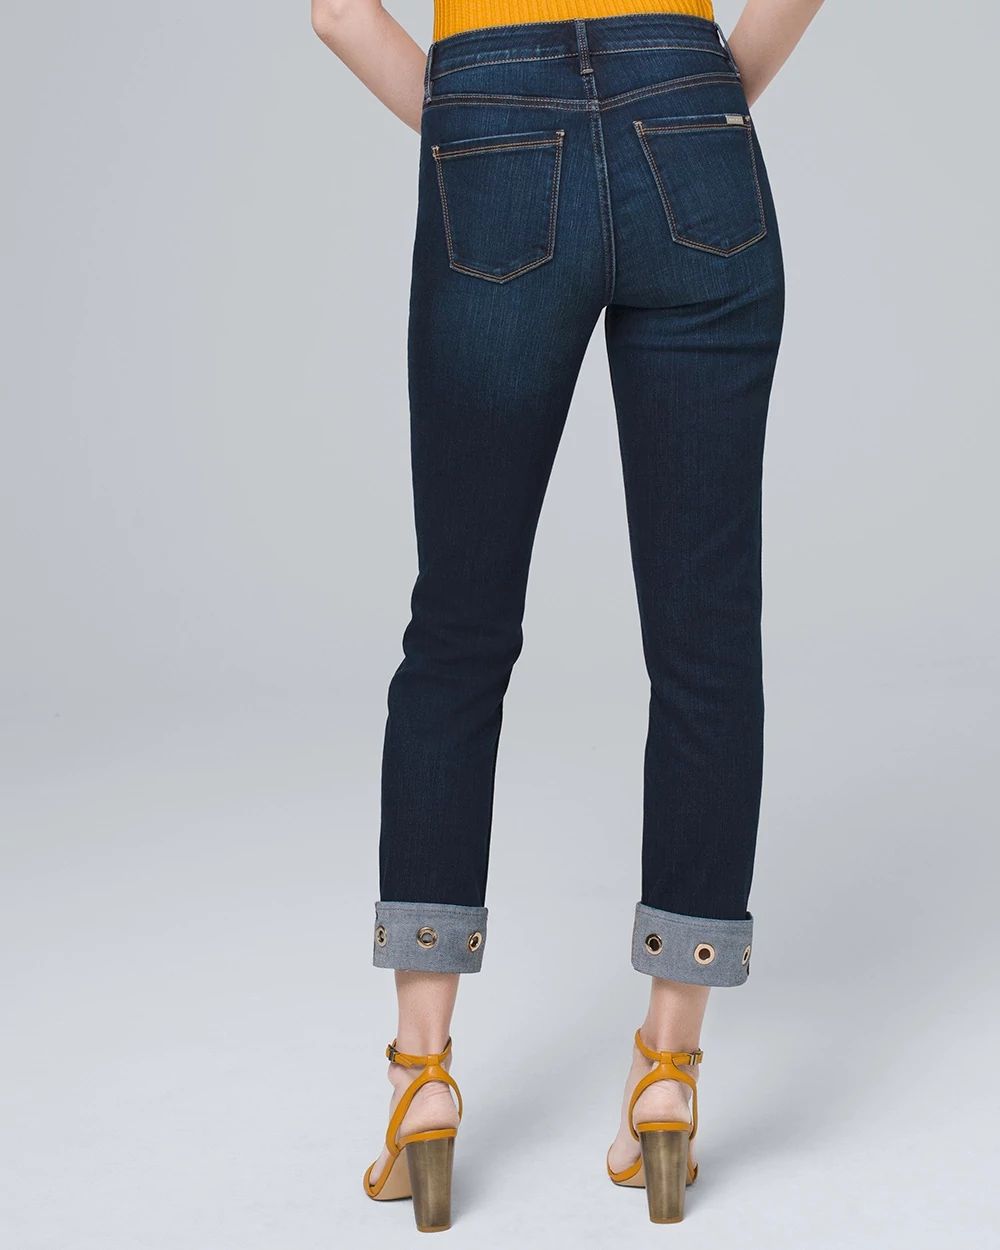 Mid-Rise Grommet-Hem Straight Crop Jeans click to view larger image.